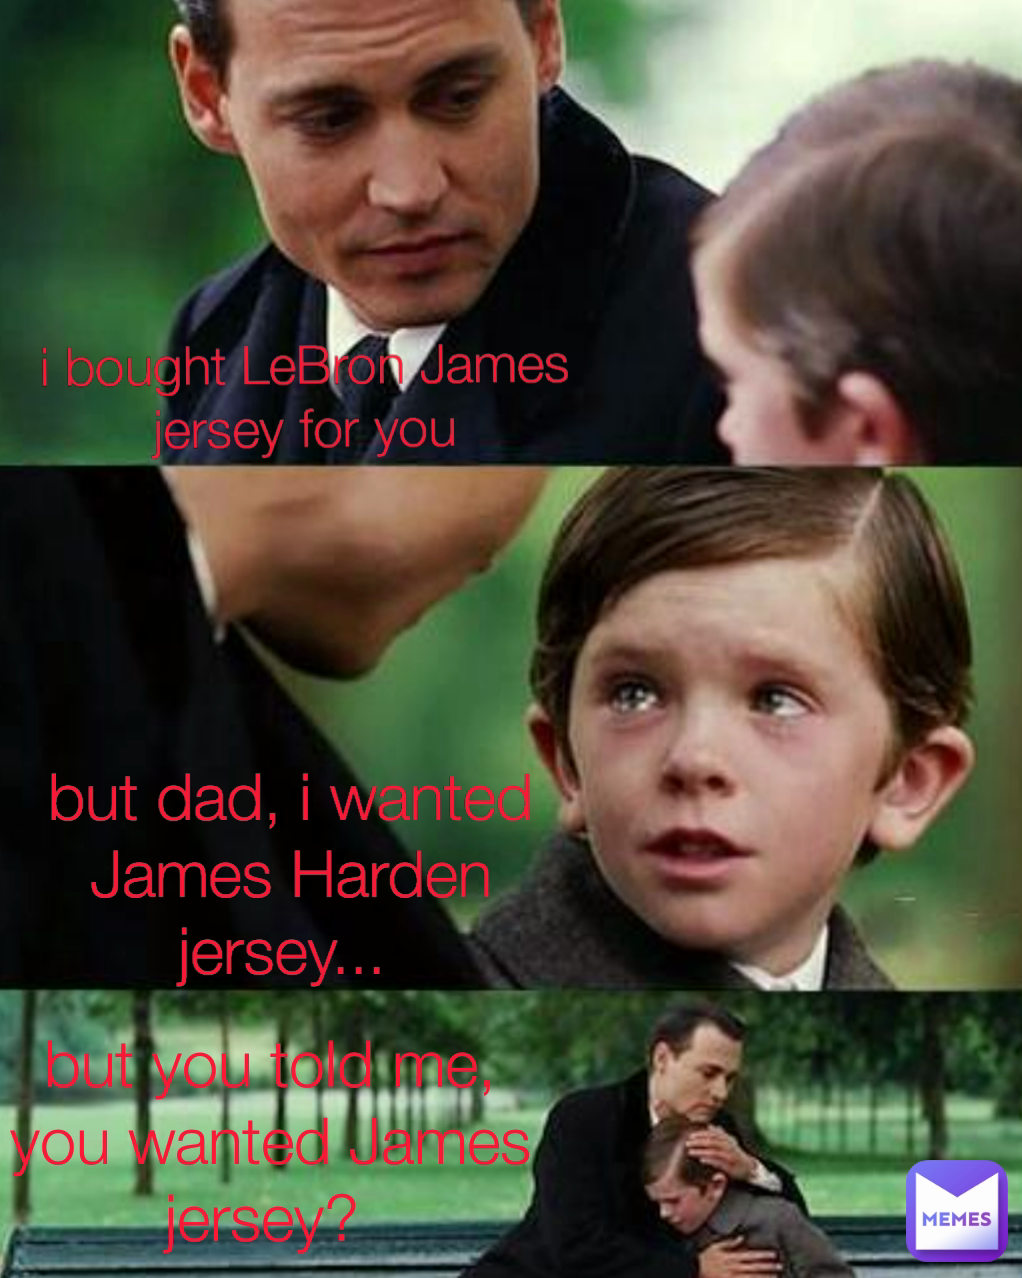 but dad, i wanted James Harden jersey...  i bought LeBron James jersey for you but you told me, you wanted James jersey? 